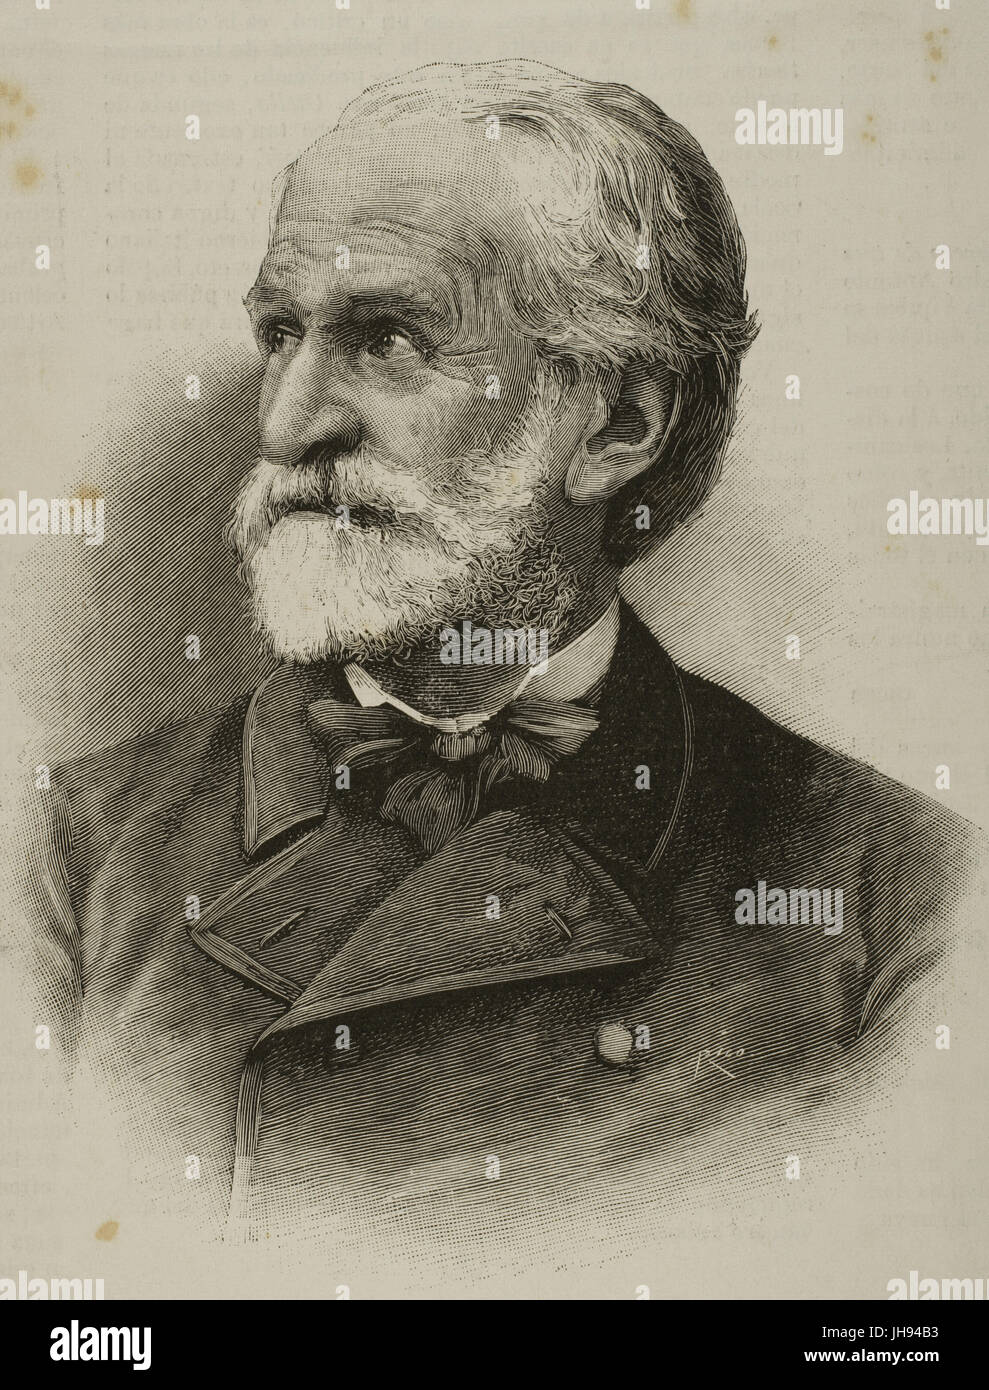 Giuseppe Verdi (1813-1901). Italian composer. Engraving by Rico in The Spanish and American Illustration, 19th century. Stock Photo